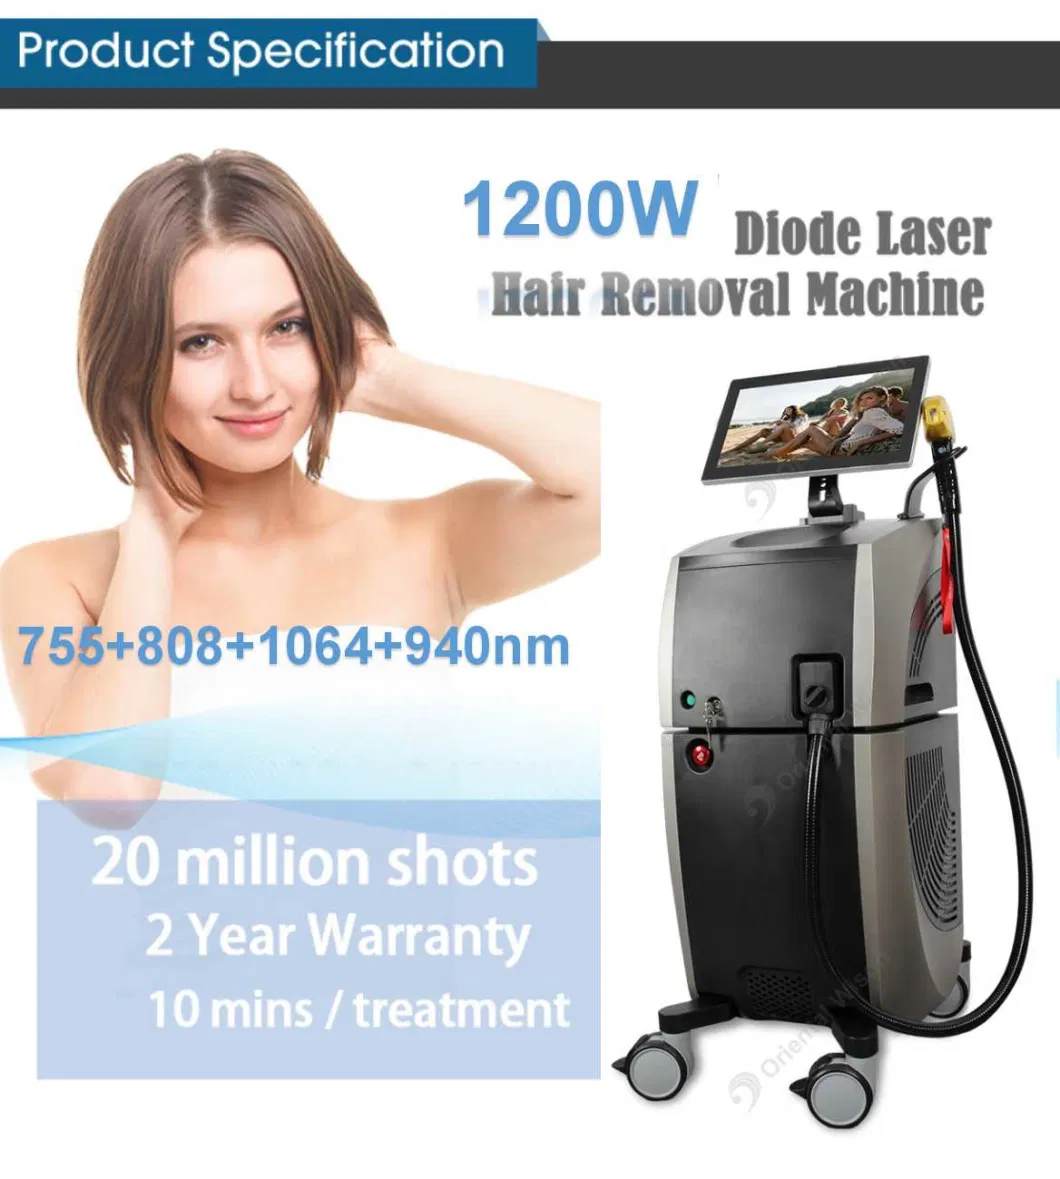 Diode Laser 2 Handle 4 Wavelength Diode Laser 755nm 808nm 940nm 1064nm Laser Hair Removal Lasers for SPA Salon